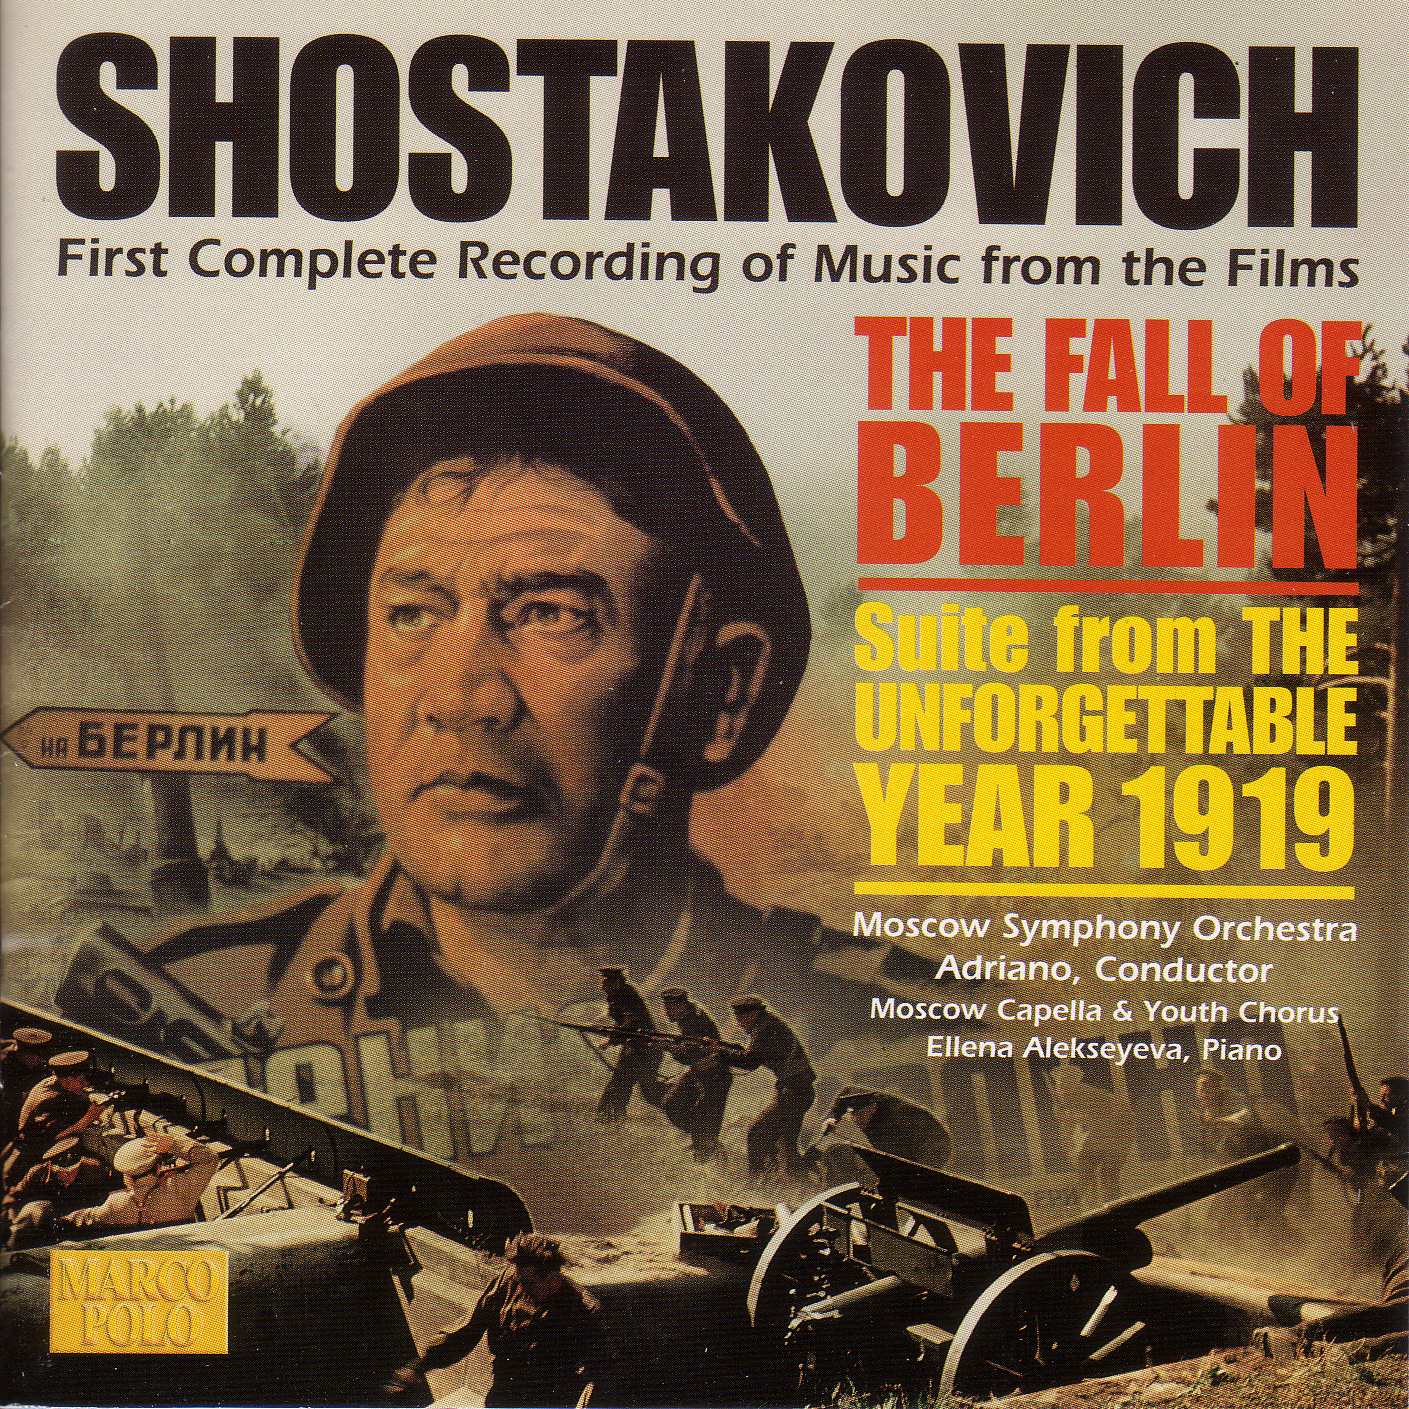 eClassical - Shostakovich: The Fall of Berlin / The Unforgettable Year 1919  Suite